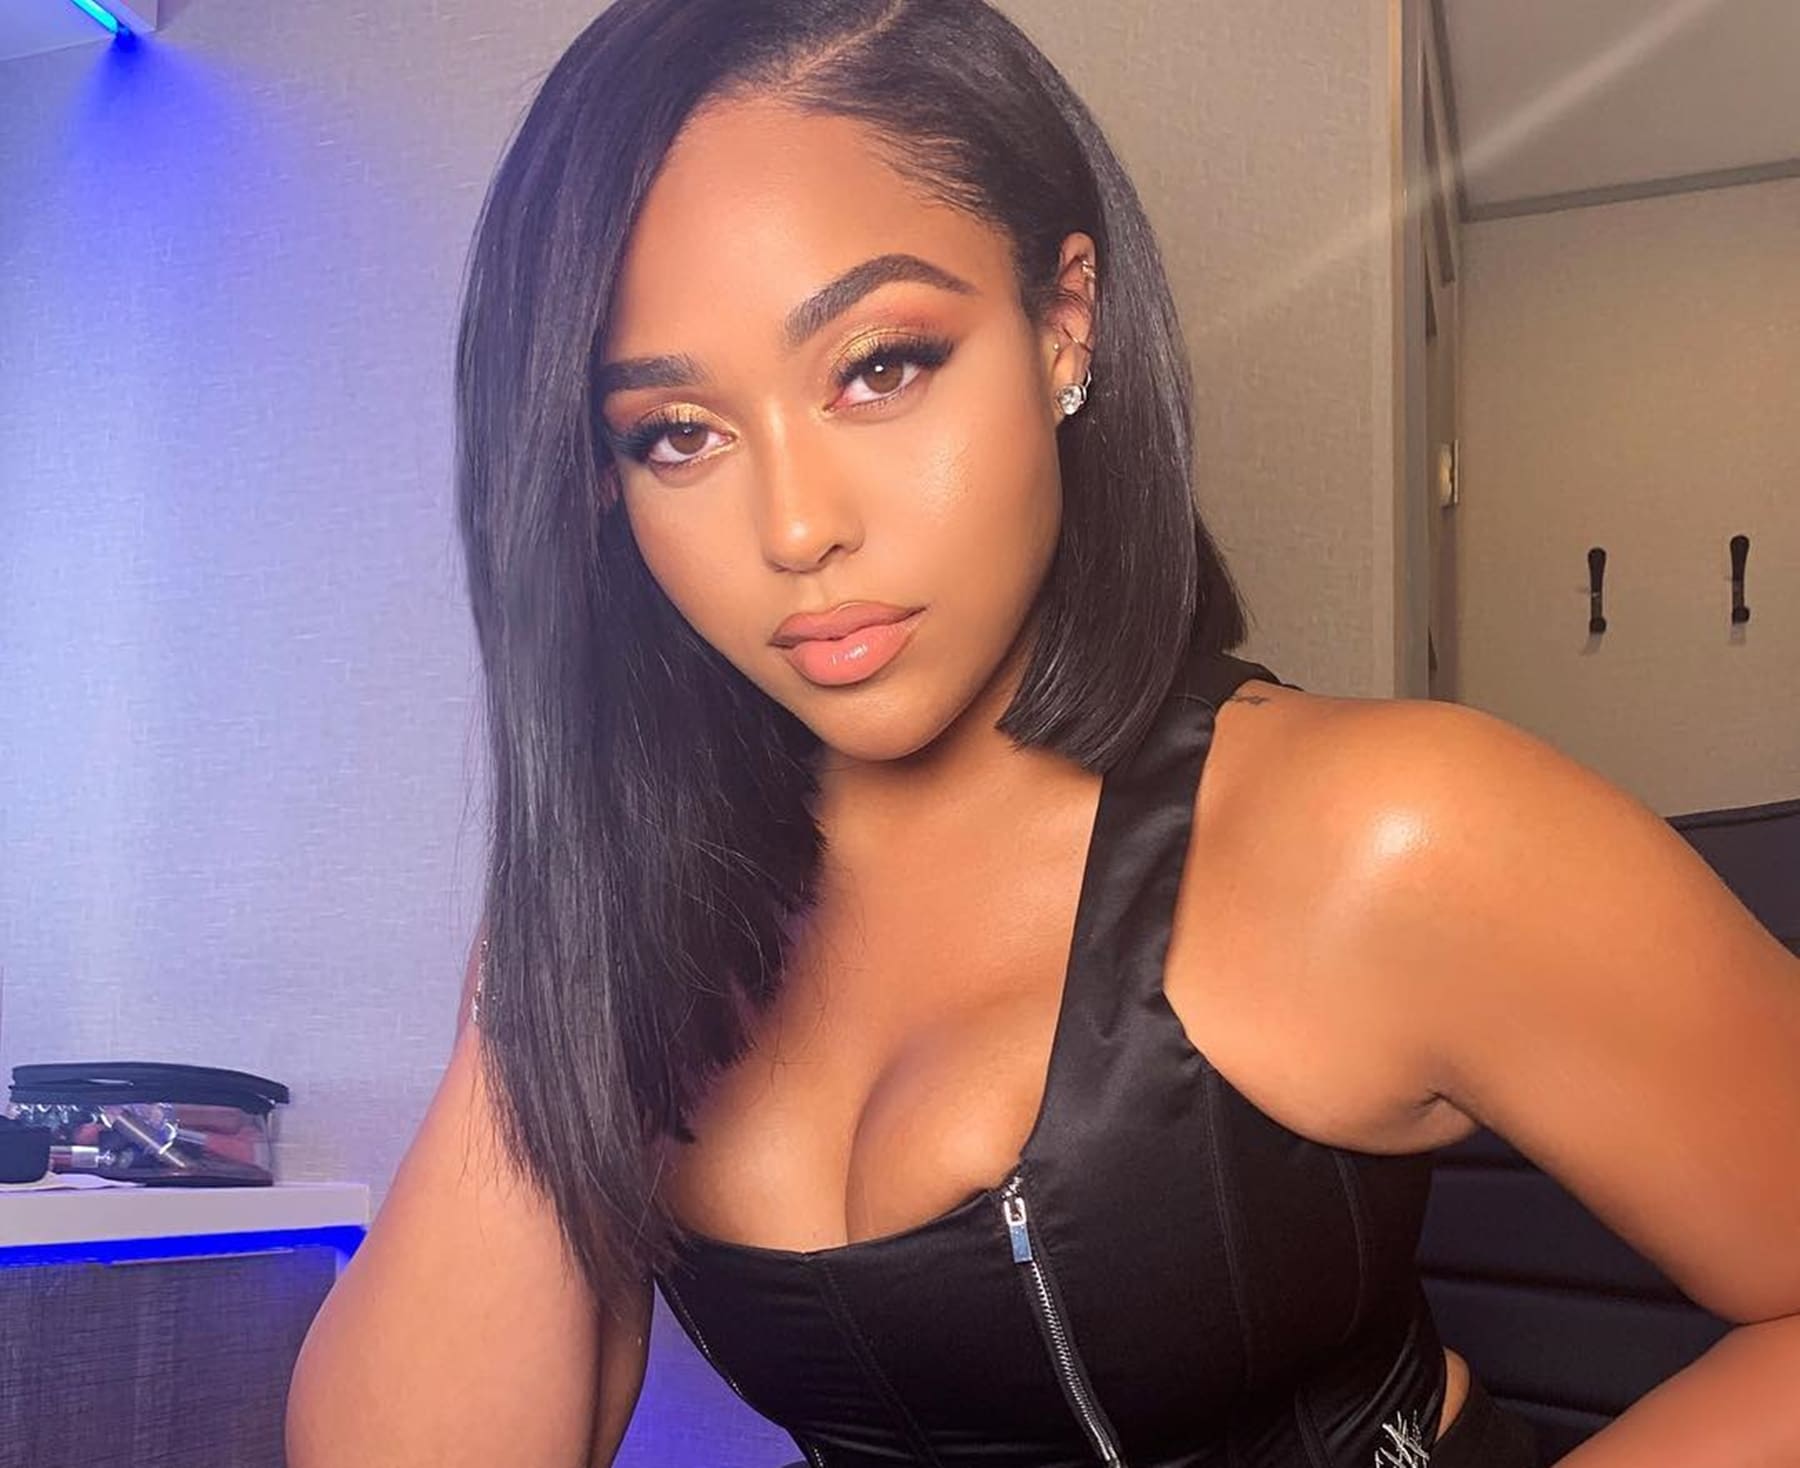 jordyn-woods-shows-off-her-curves-on-ig-see-the-clips-here